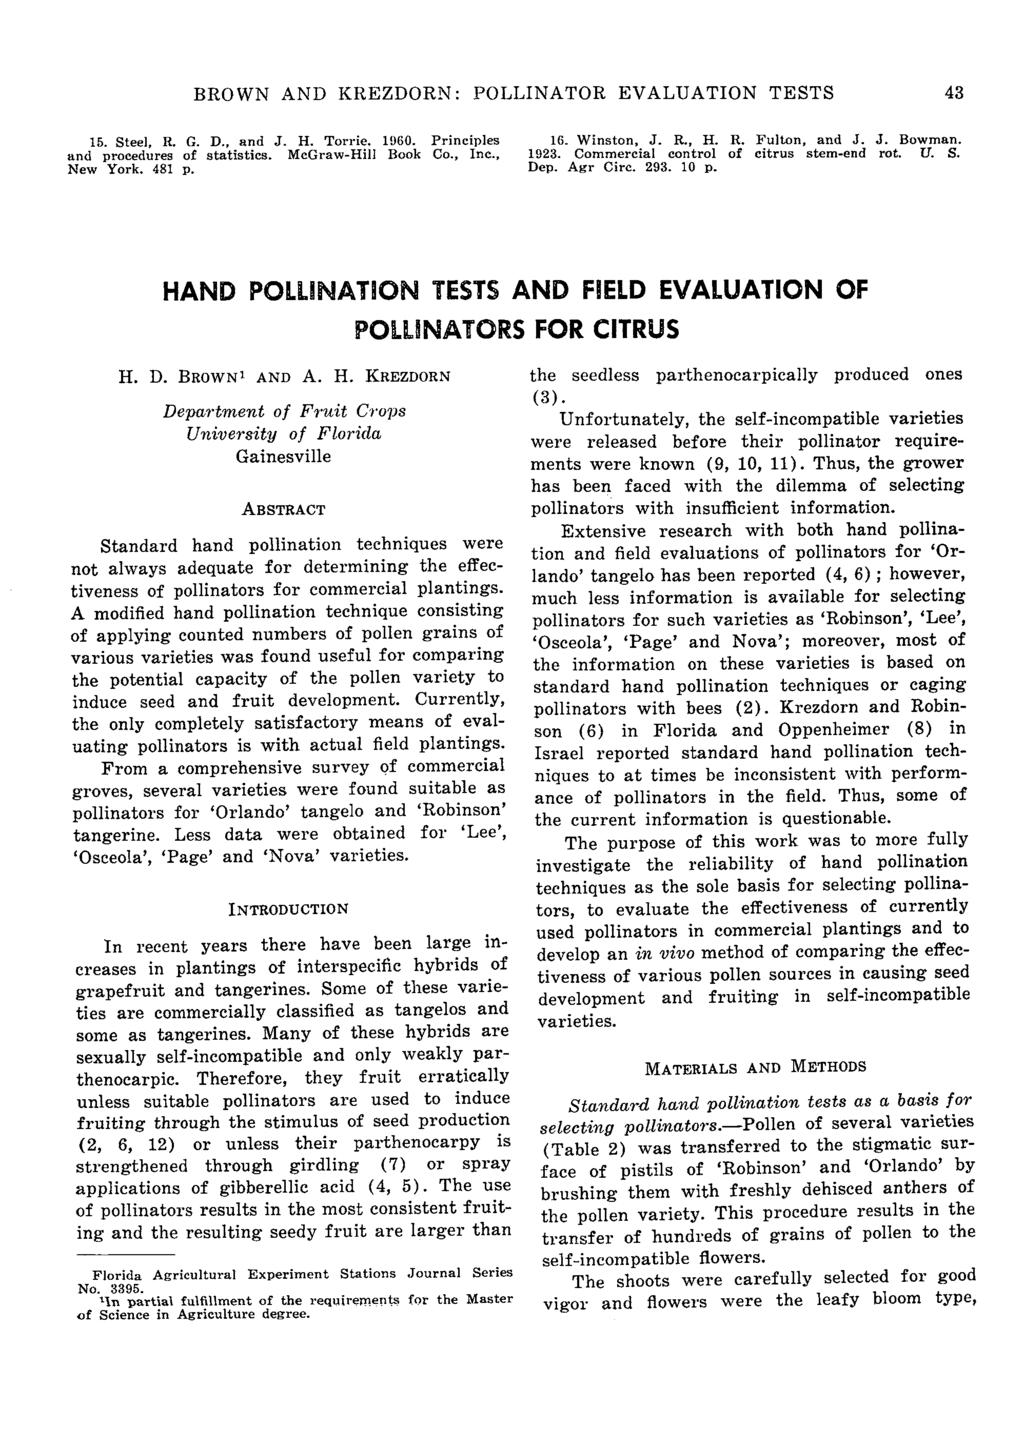 BROWN AND KREZDORN: LLINATOR EVALUATION TET 4 15. teel, R. G. D., and J. H. Torrie. 190. Principle and procedure of tatitic. McGrawHill Book Co., Inc., New York. 481 p. 1. Winton, J. R., H. R. ulton, and J.